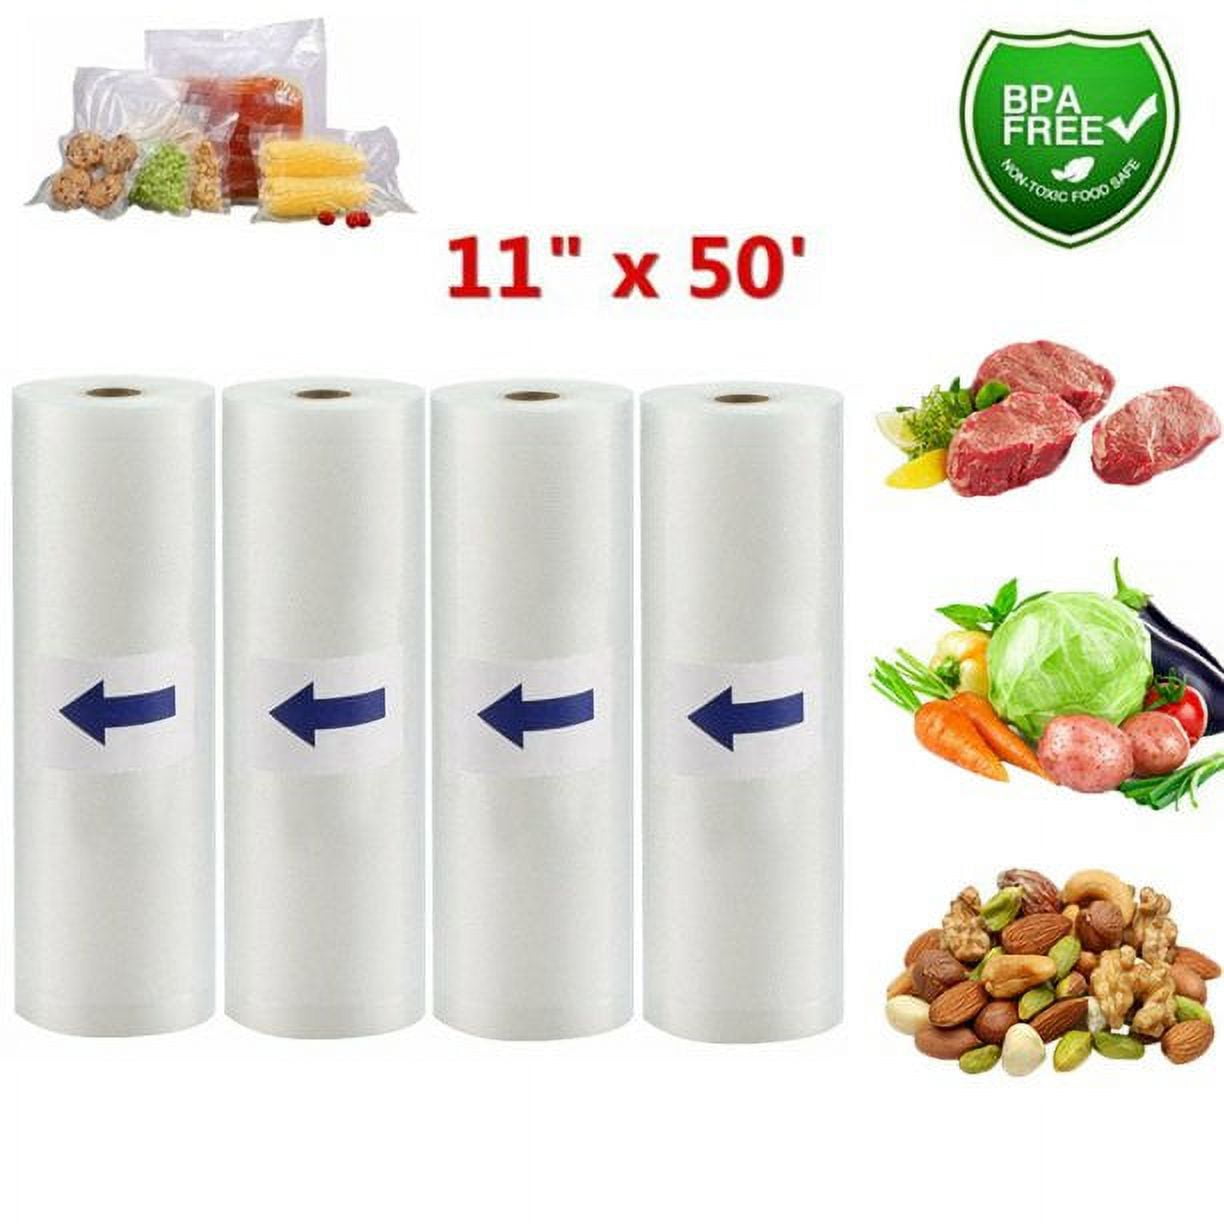 4 Pack Vacuum Sealer Bags,11 x 50' Rolls Kitchen Food Meat Saver Storage  Bags, Embossed, BPA Free,Commercial Grade for Meal Prep Sous Vide 